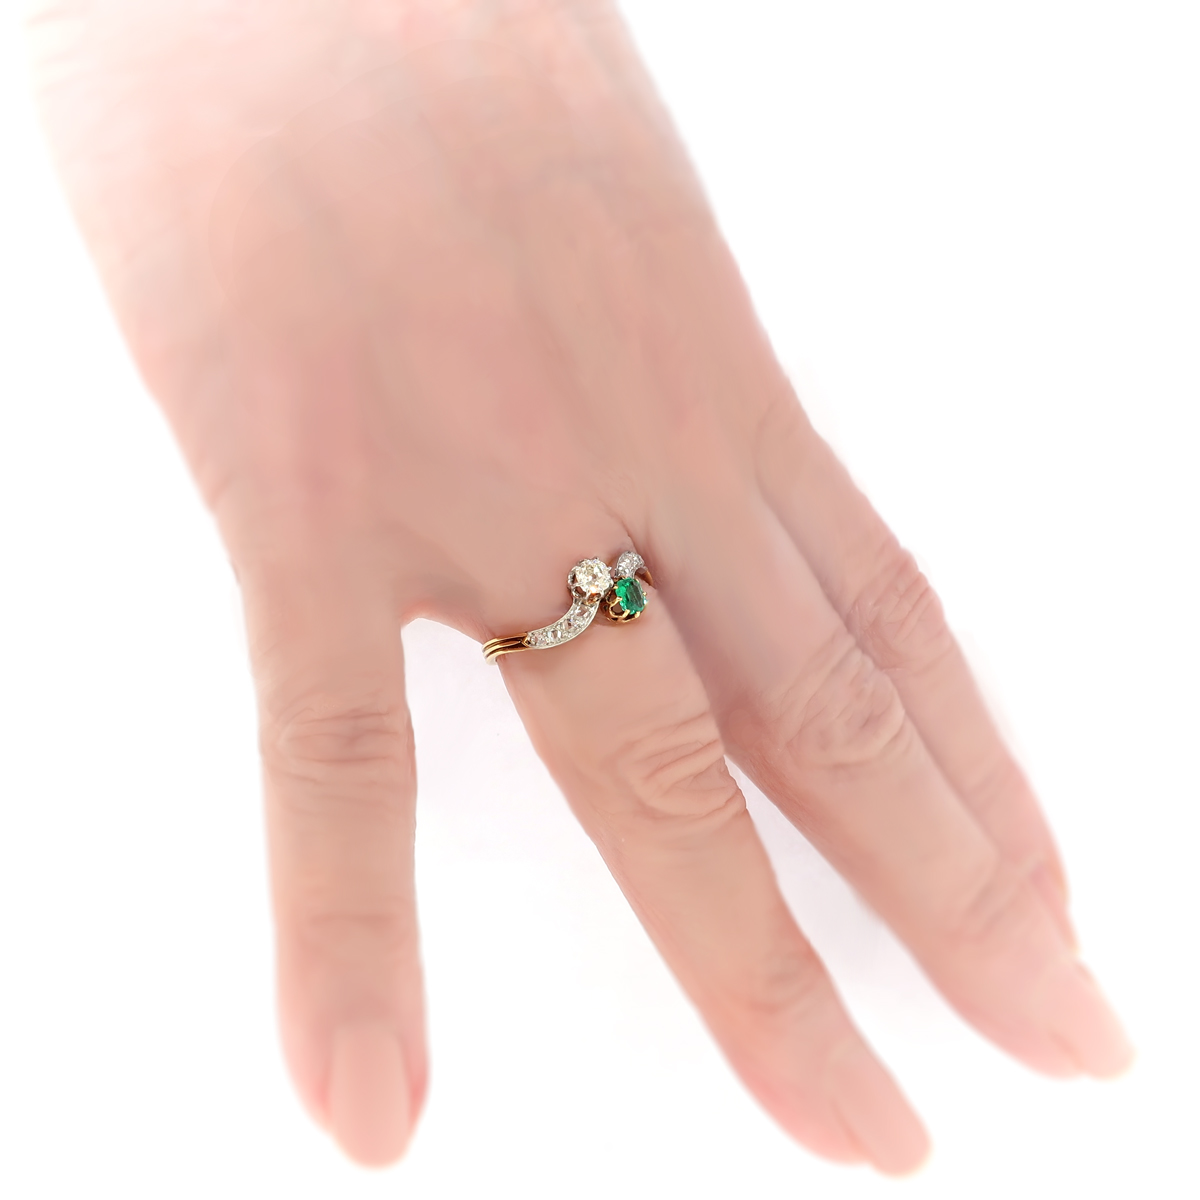 Antique Edwardian Emerald and Diamond Toi et Moi Crossover Ring 18k